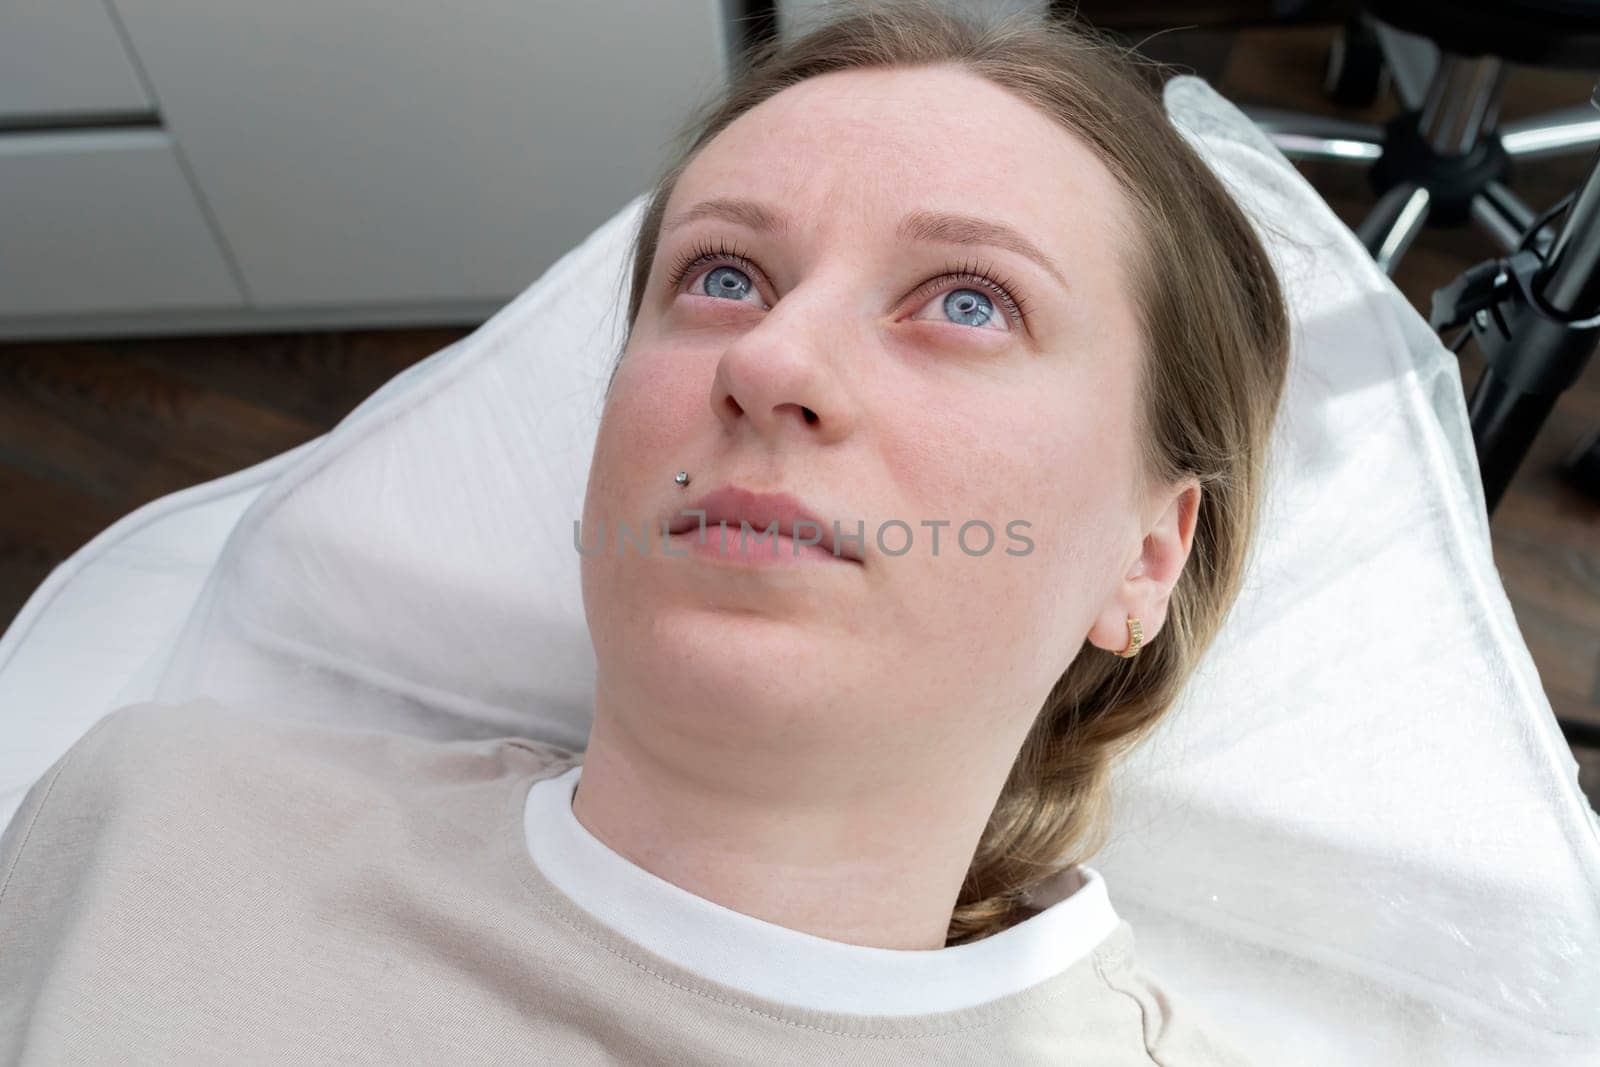 Portrait Of Young Caucasian Woman After Eyelash Lamination Procedure, Lash Treatment Lying on Couch. Horizontal Plane High quality photo.